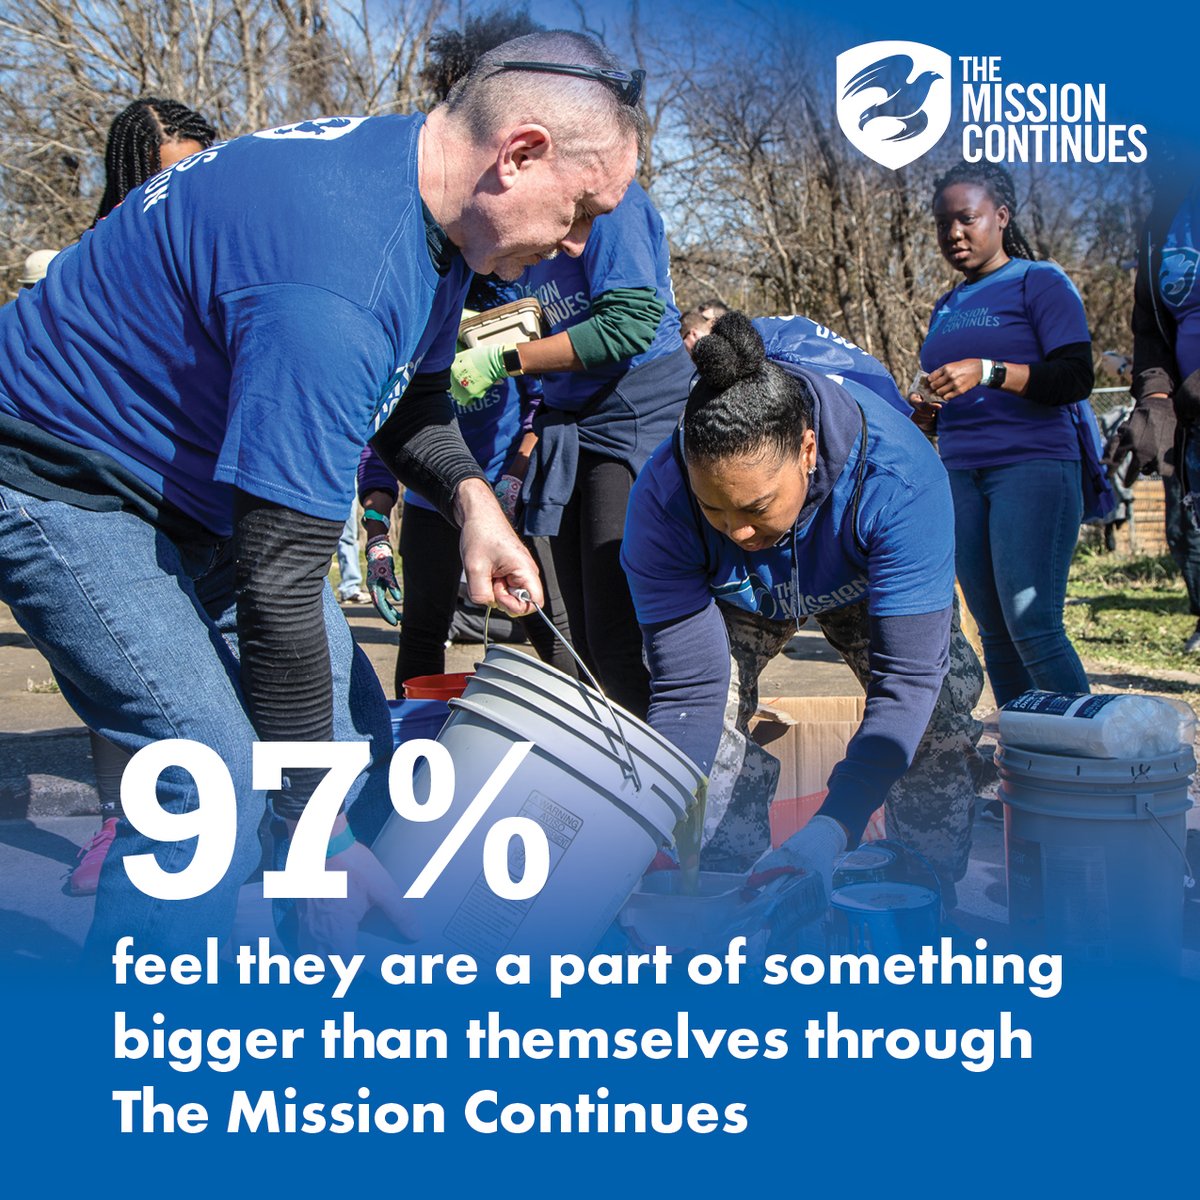 We may have taken off the uniform, but that doesn’t mean we stop serving. At The Mission Continues, we empower #veterans to continue their service, and empower their communities with veteran talent, skills, and preparedness to generate visible impact. missioncontinues.org/service-platoo…